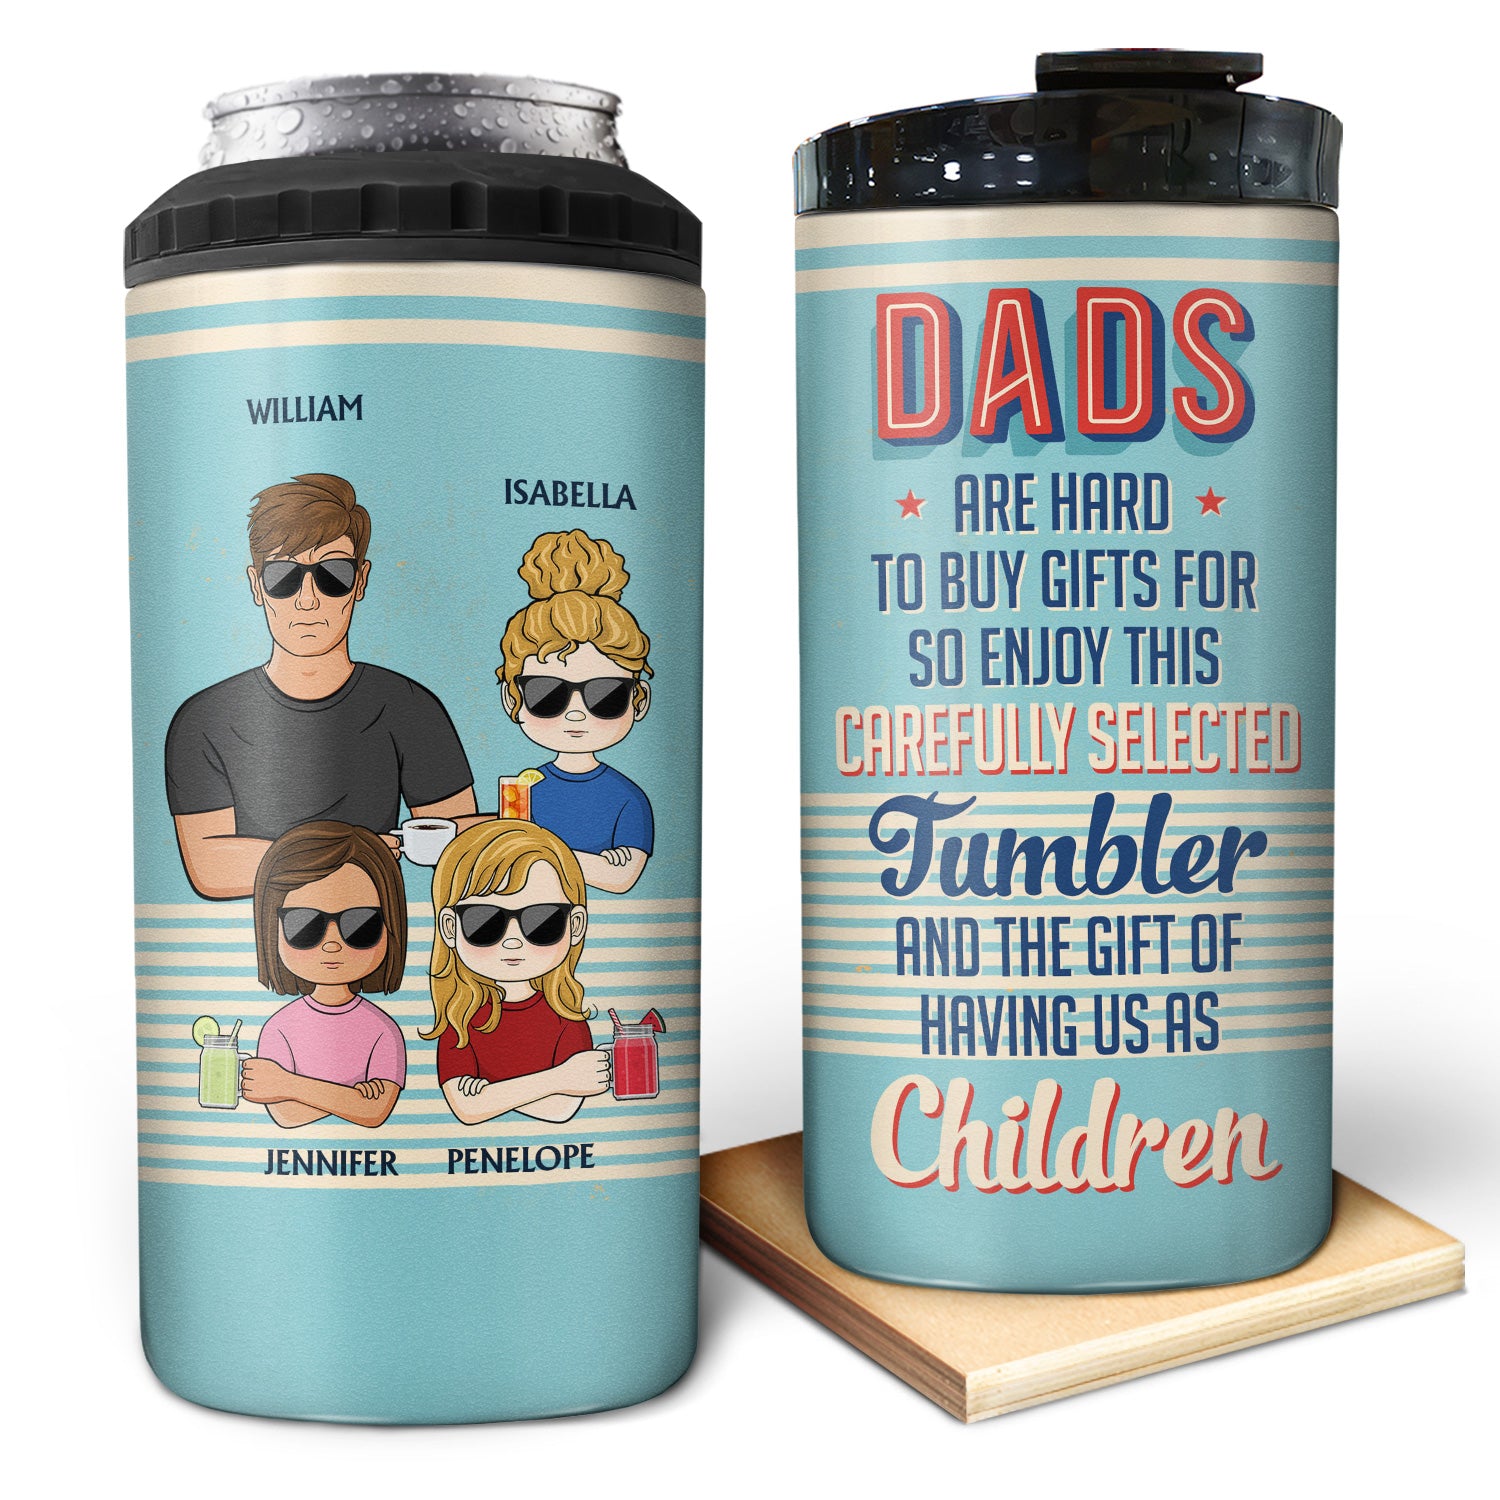 Dads Are Hard To Buy Gifts For So Enjoy - Birthday, Loving Gift For Father, Grandpa, Grandfather - Personalized Custom 4 In 1 Can Cooler Tumbler